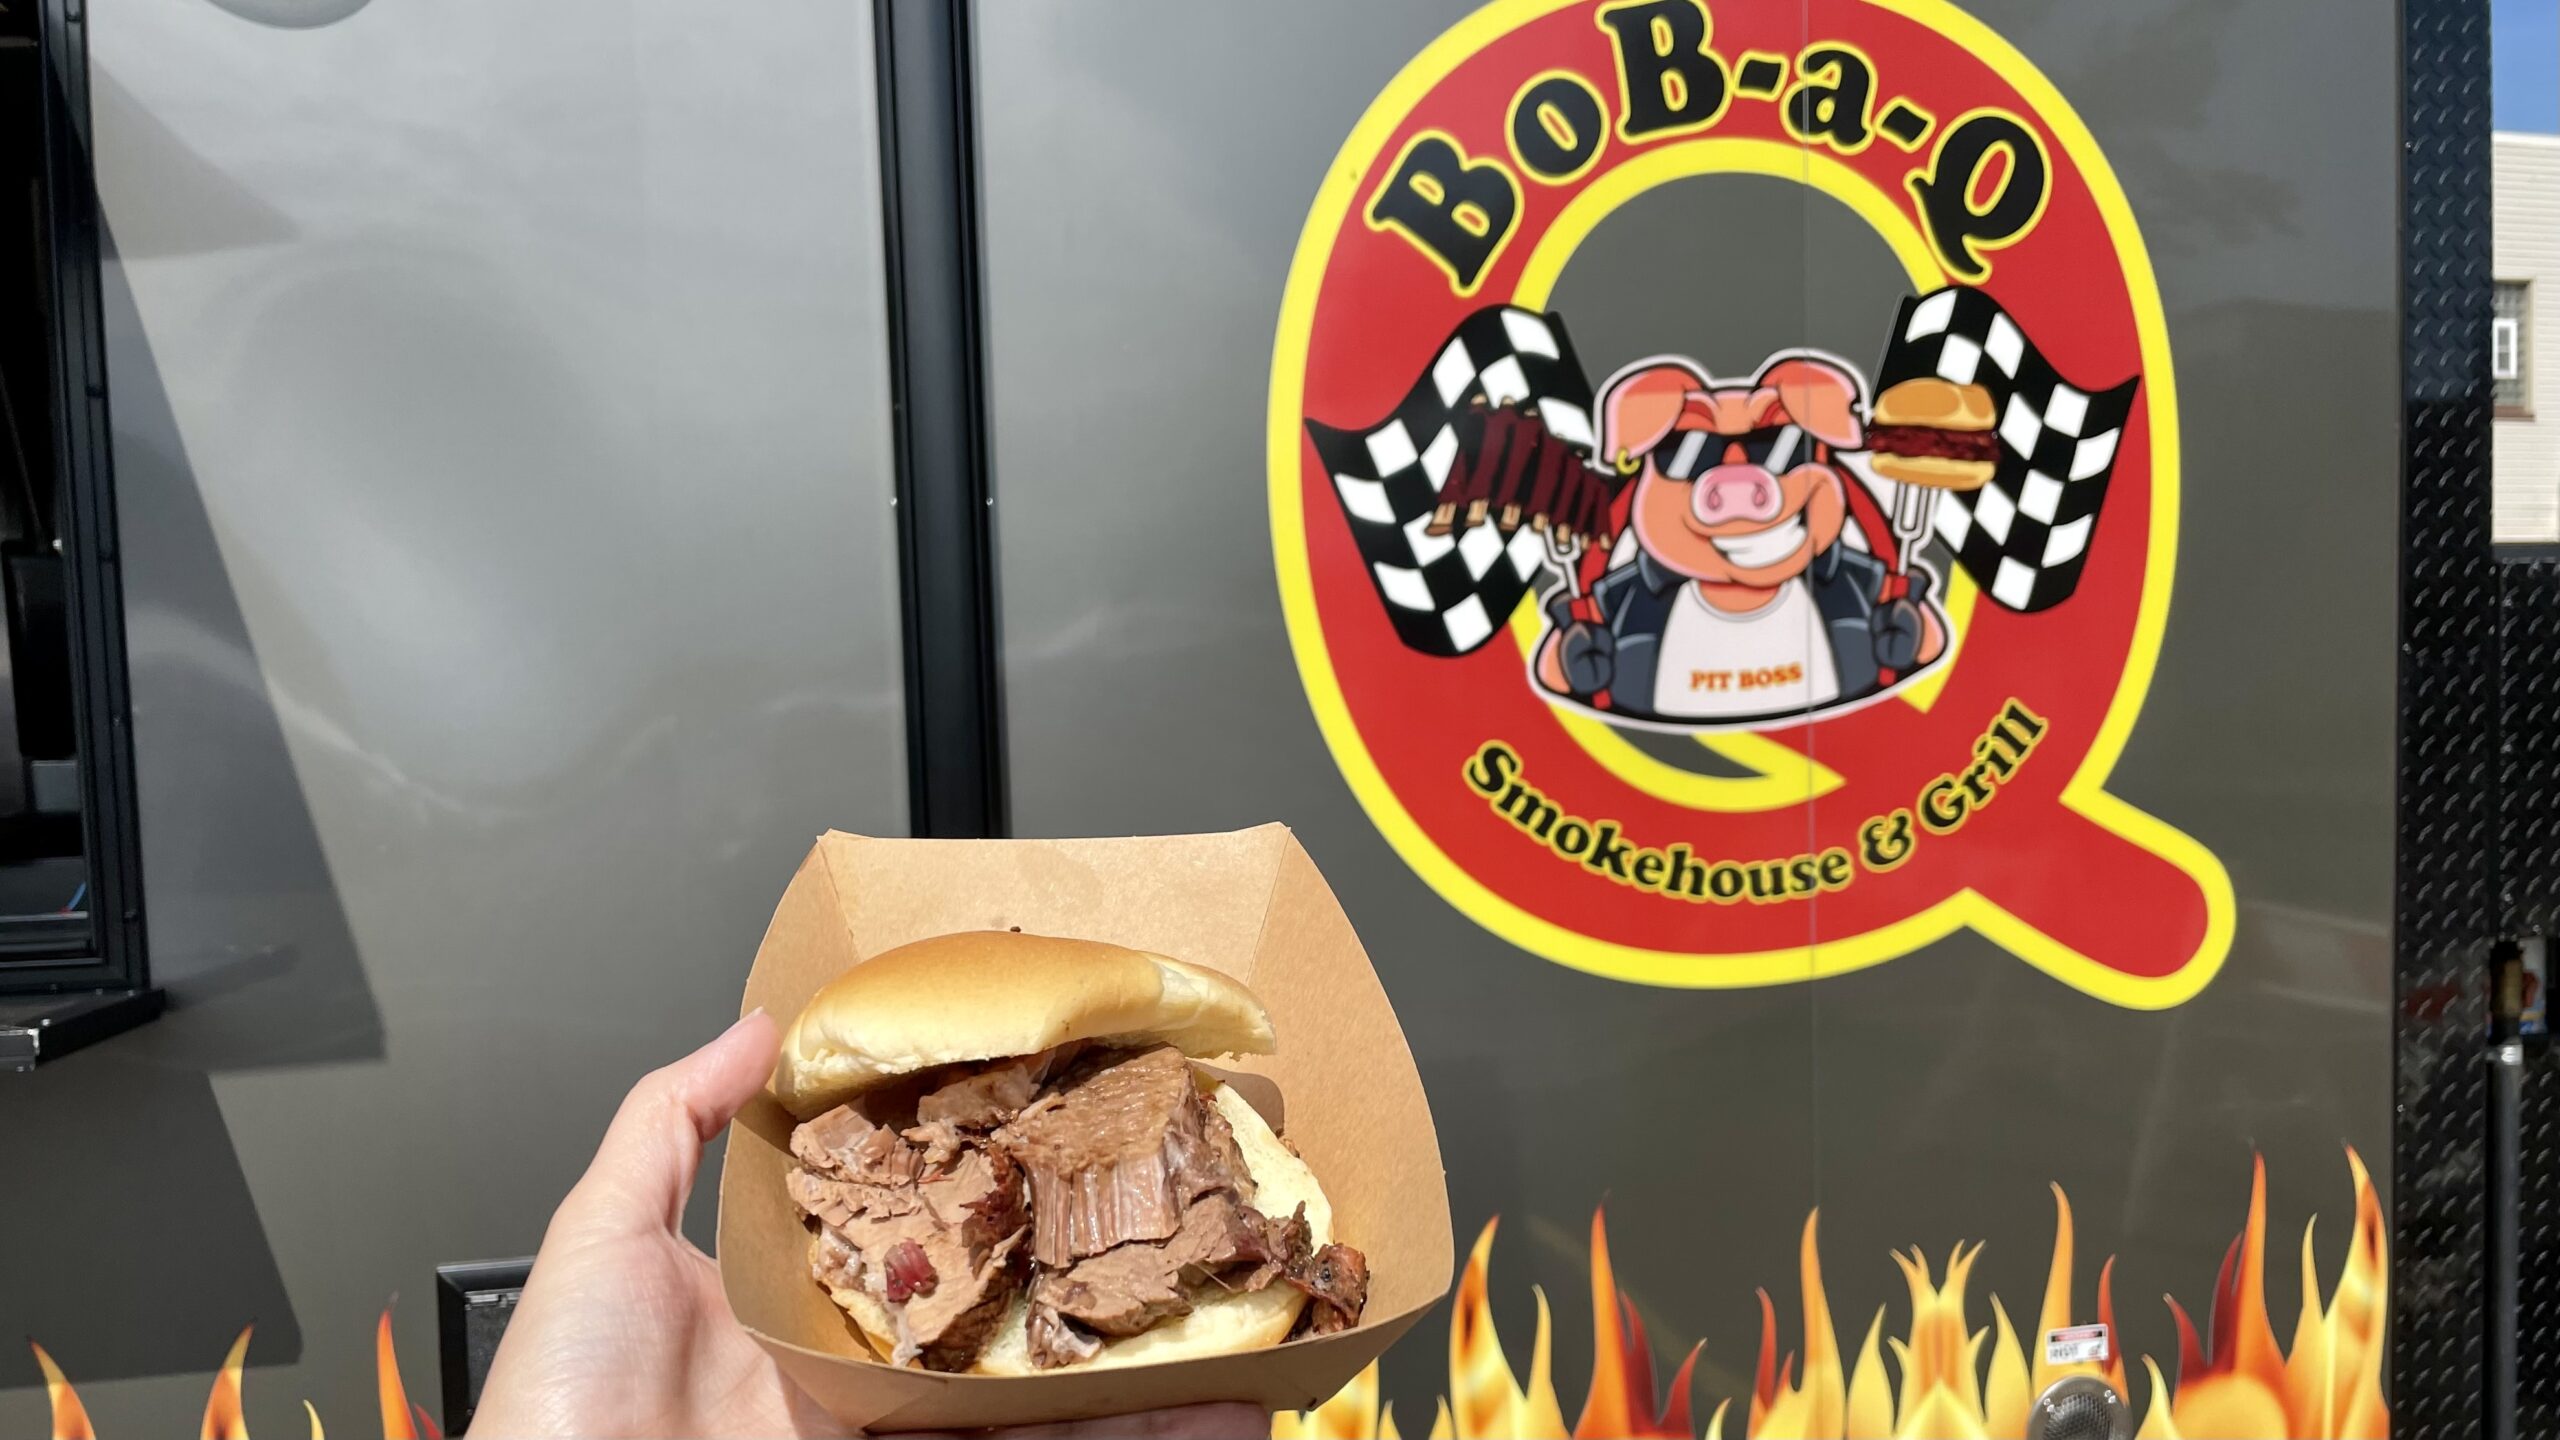 A brisket sandwich in front of the Bob-A-Q food truck